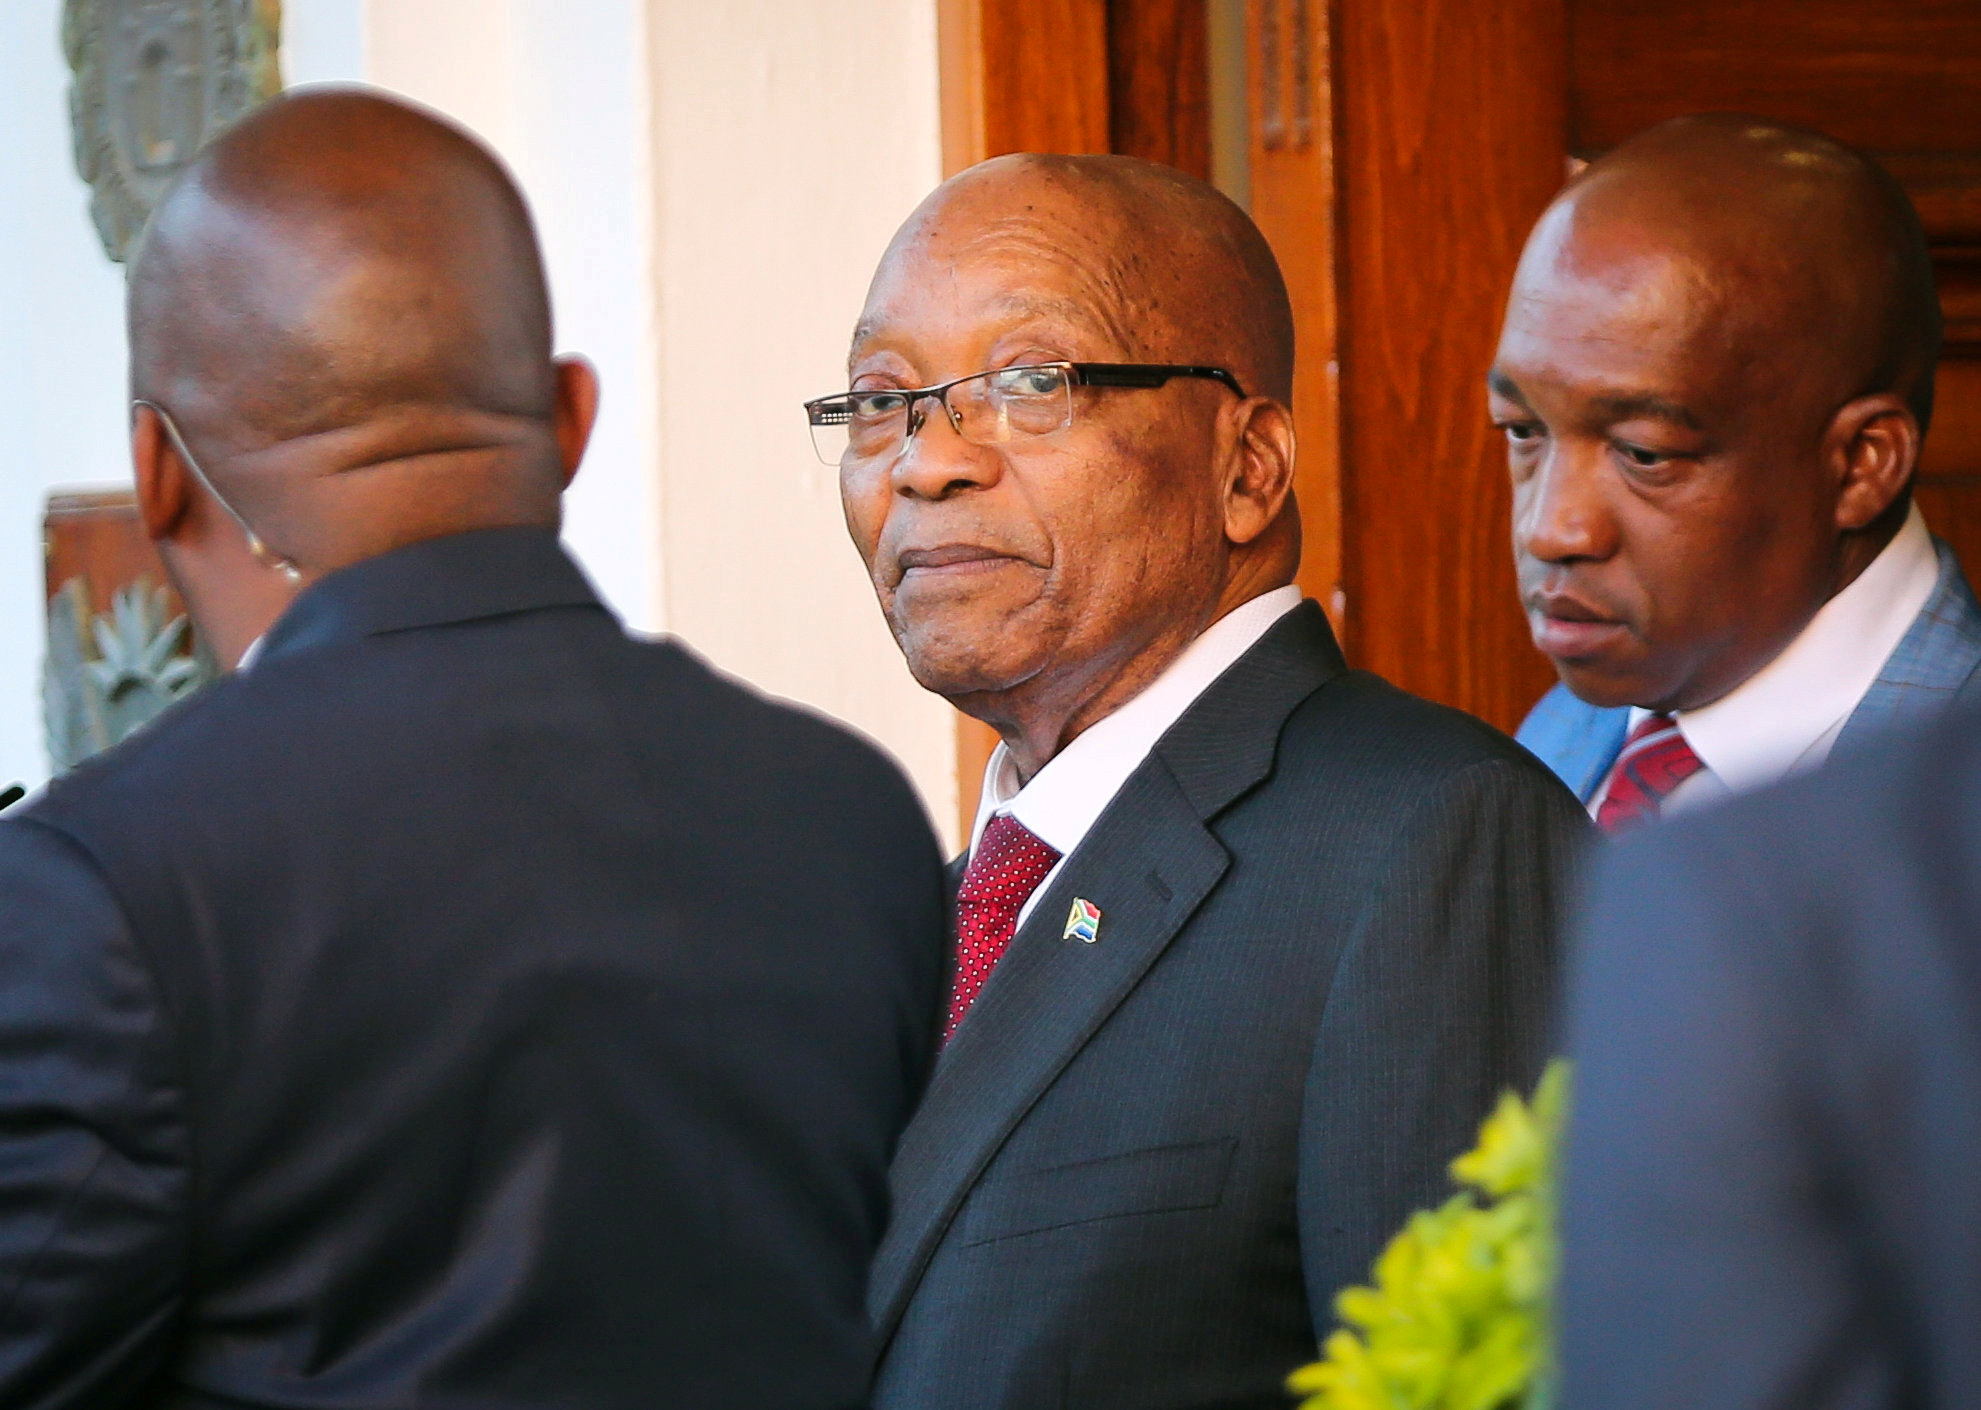 President Jacob Zuma leaves Tuynhuys, the office of the presidency, in Cape Town, South Africa on Feb. 7, 2018. (Sumaya Hisham—Reuters)